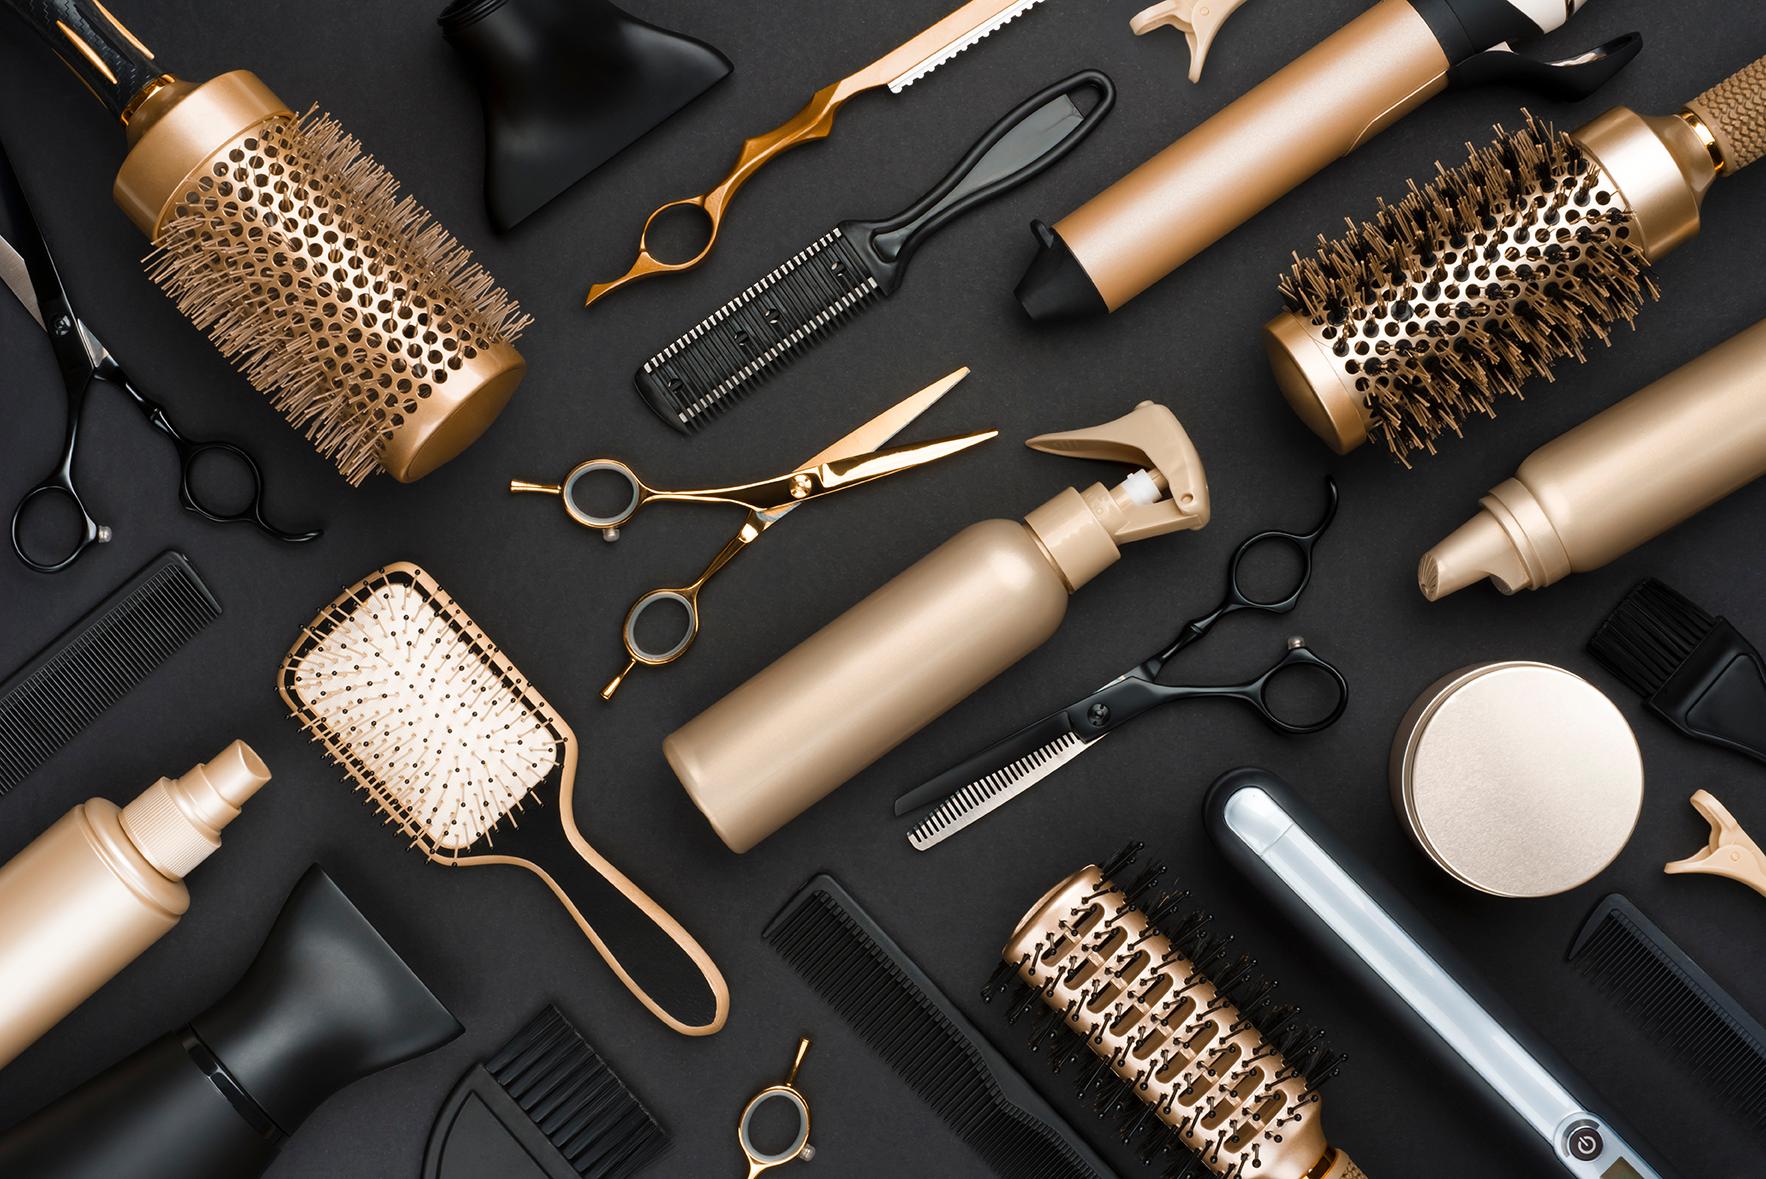 Image of styling tools